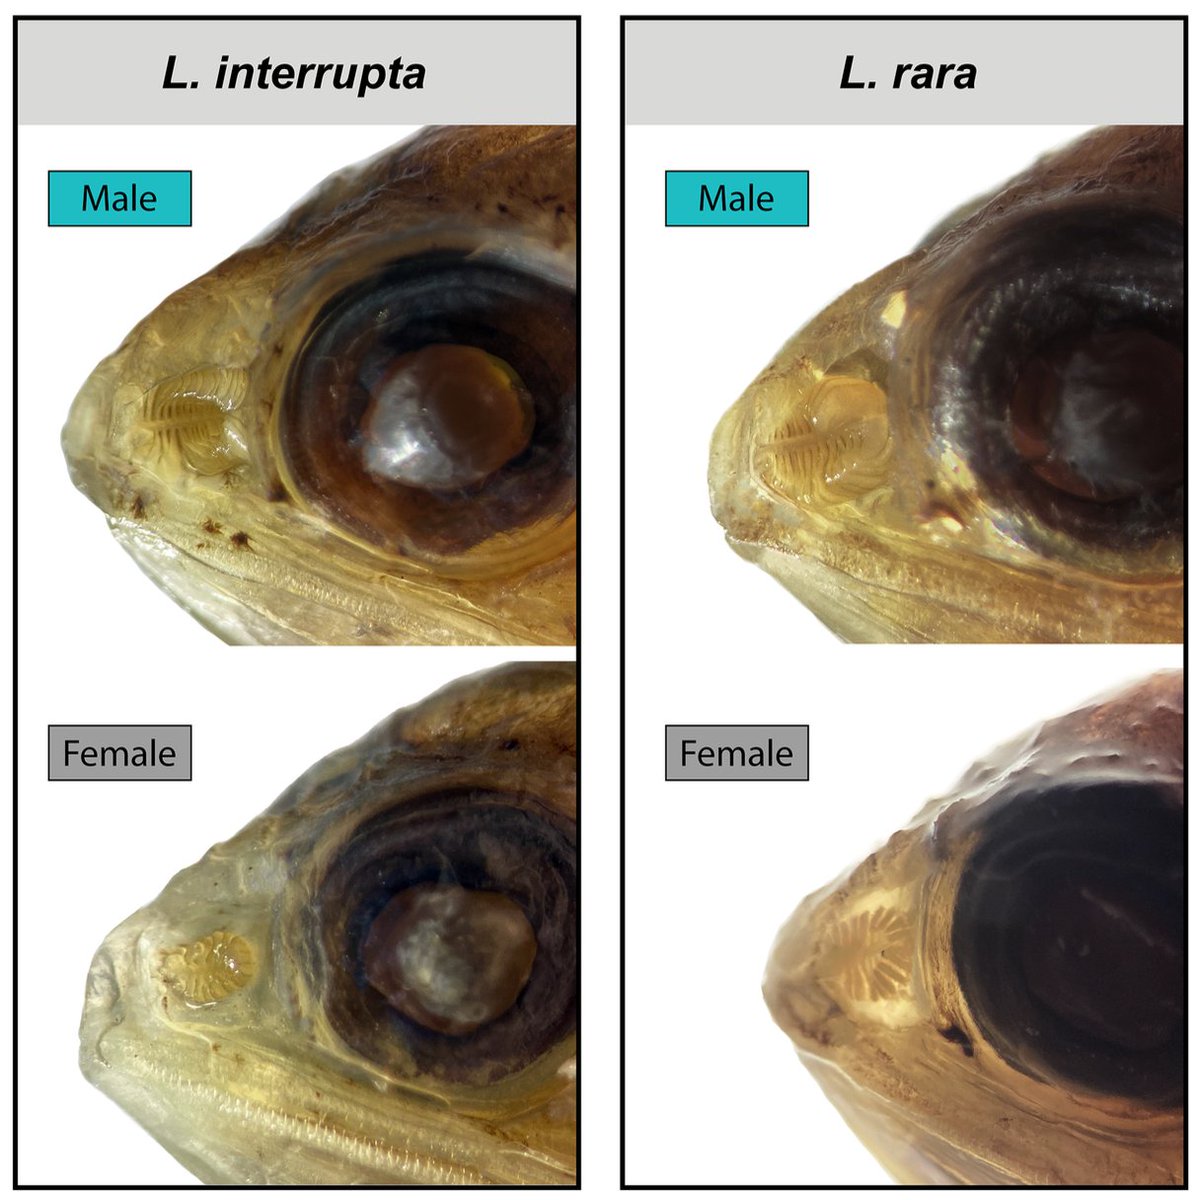 I'm excited to announce my new paper (@PeerJLife) describing the first evidence of sexual dimorphism in olfactory organs of #lanternfishes! Our findings add to the growing body of evidence for this trait in #deepsea fishes. peerj.com/articles/17075